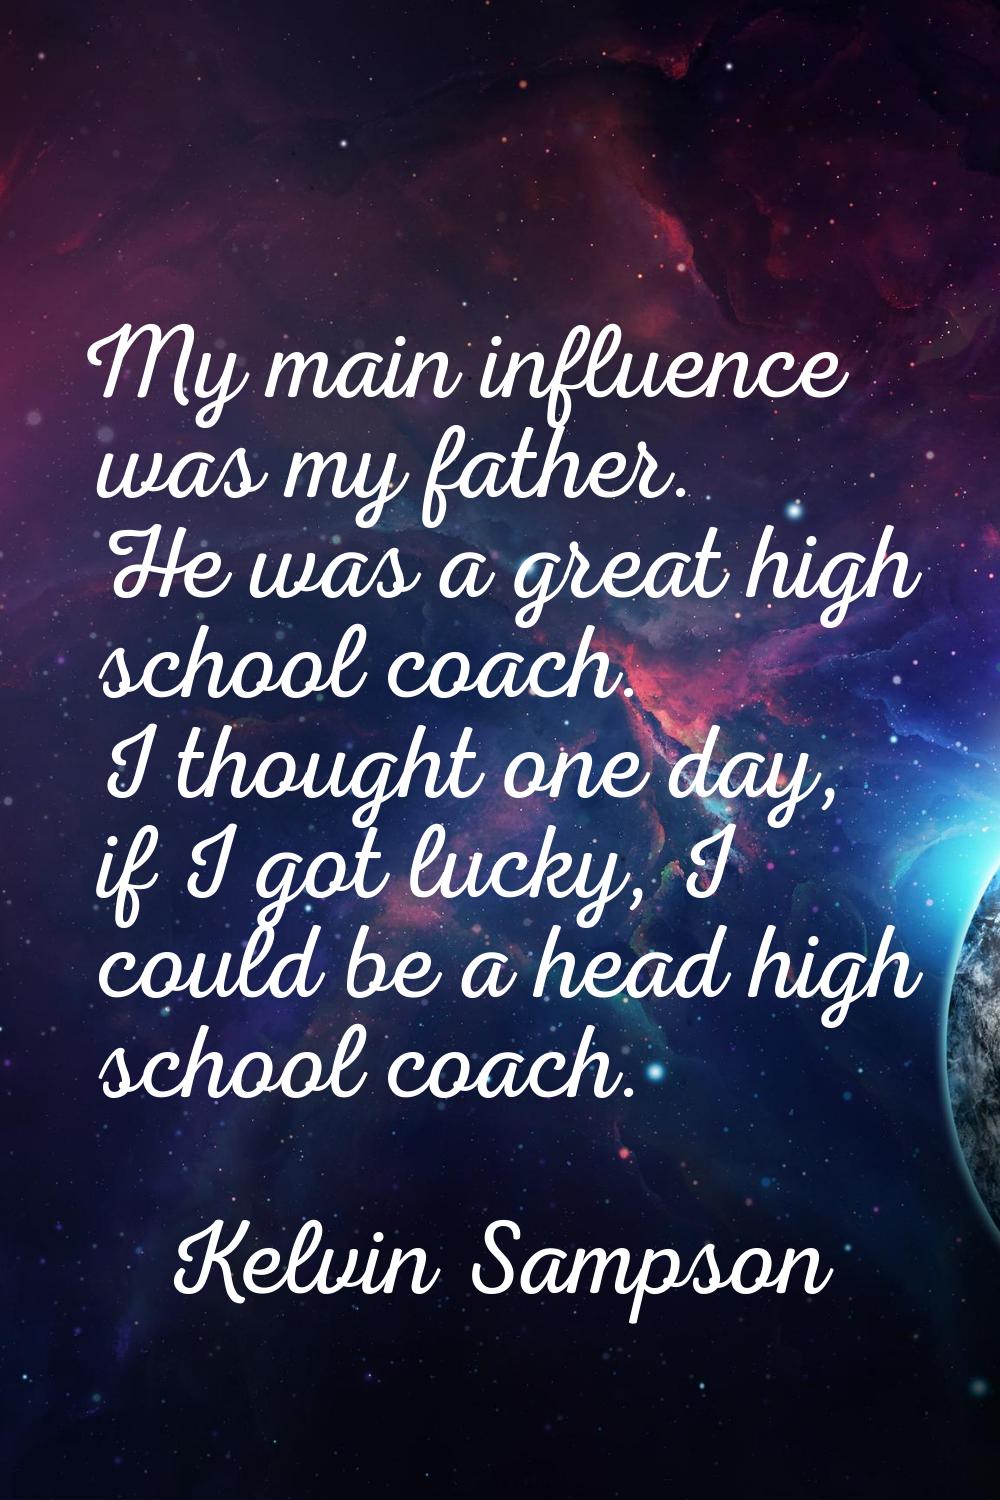 My main influence was my father. He was a great high school coach. I thought one day, if I got luck